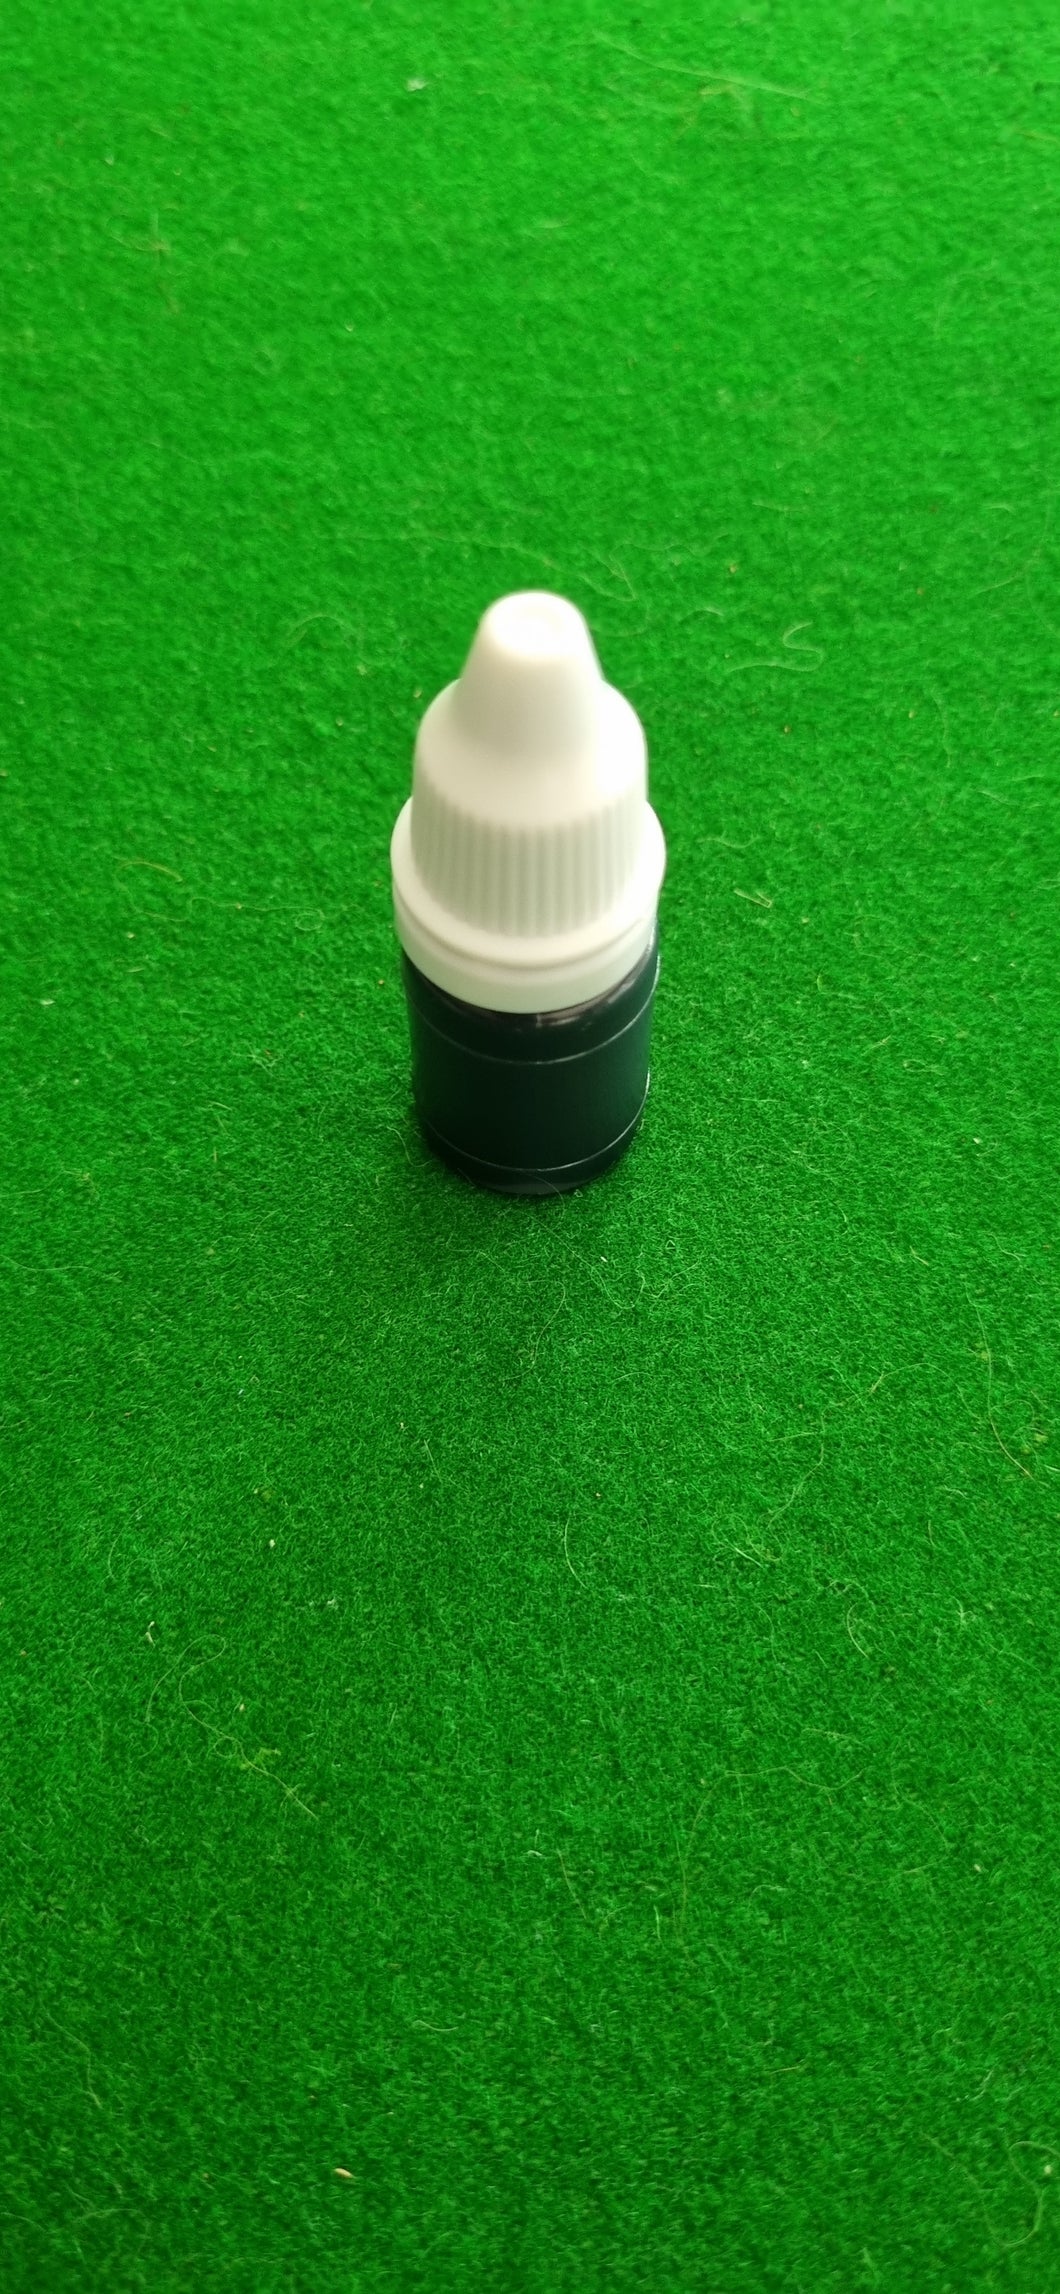 Refill Ink for Golf Ball Stamp - Blue